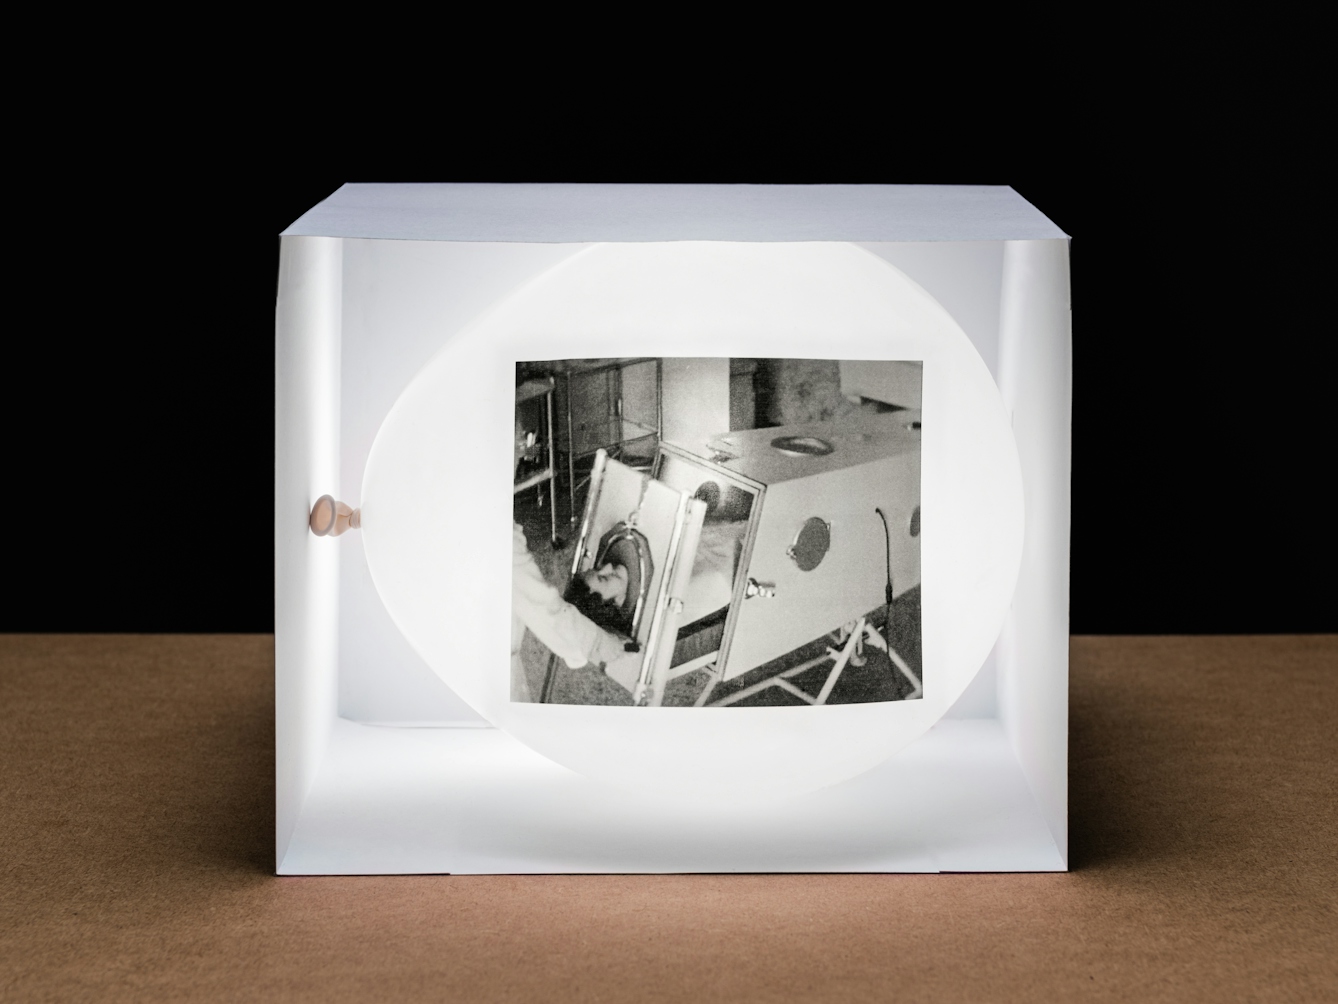 Photograph of a white inflated balloon lying horizontally within a box made of white card which is open on the side facing the camera. The balloon and box are resting on a wooden tabletop with a horizon line against a black background. The balloon looks like it is illuminated from within. On the side of the balloon is a rectangular, monochrome archive film still. The still shows a woman lying in a large metal box with her head protruding from one end. She is in the process of being slid into the box by someone’s arms entering the frame from the left. The contraction is an iron lung.